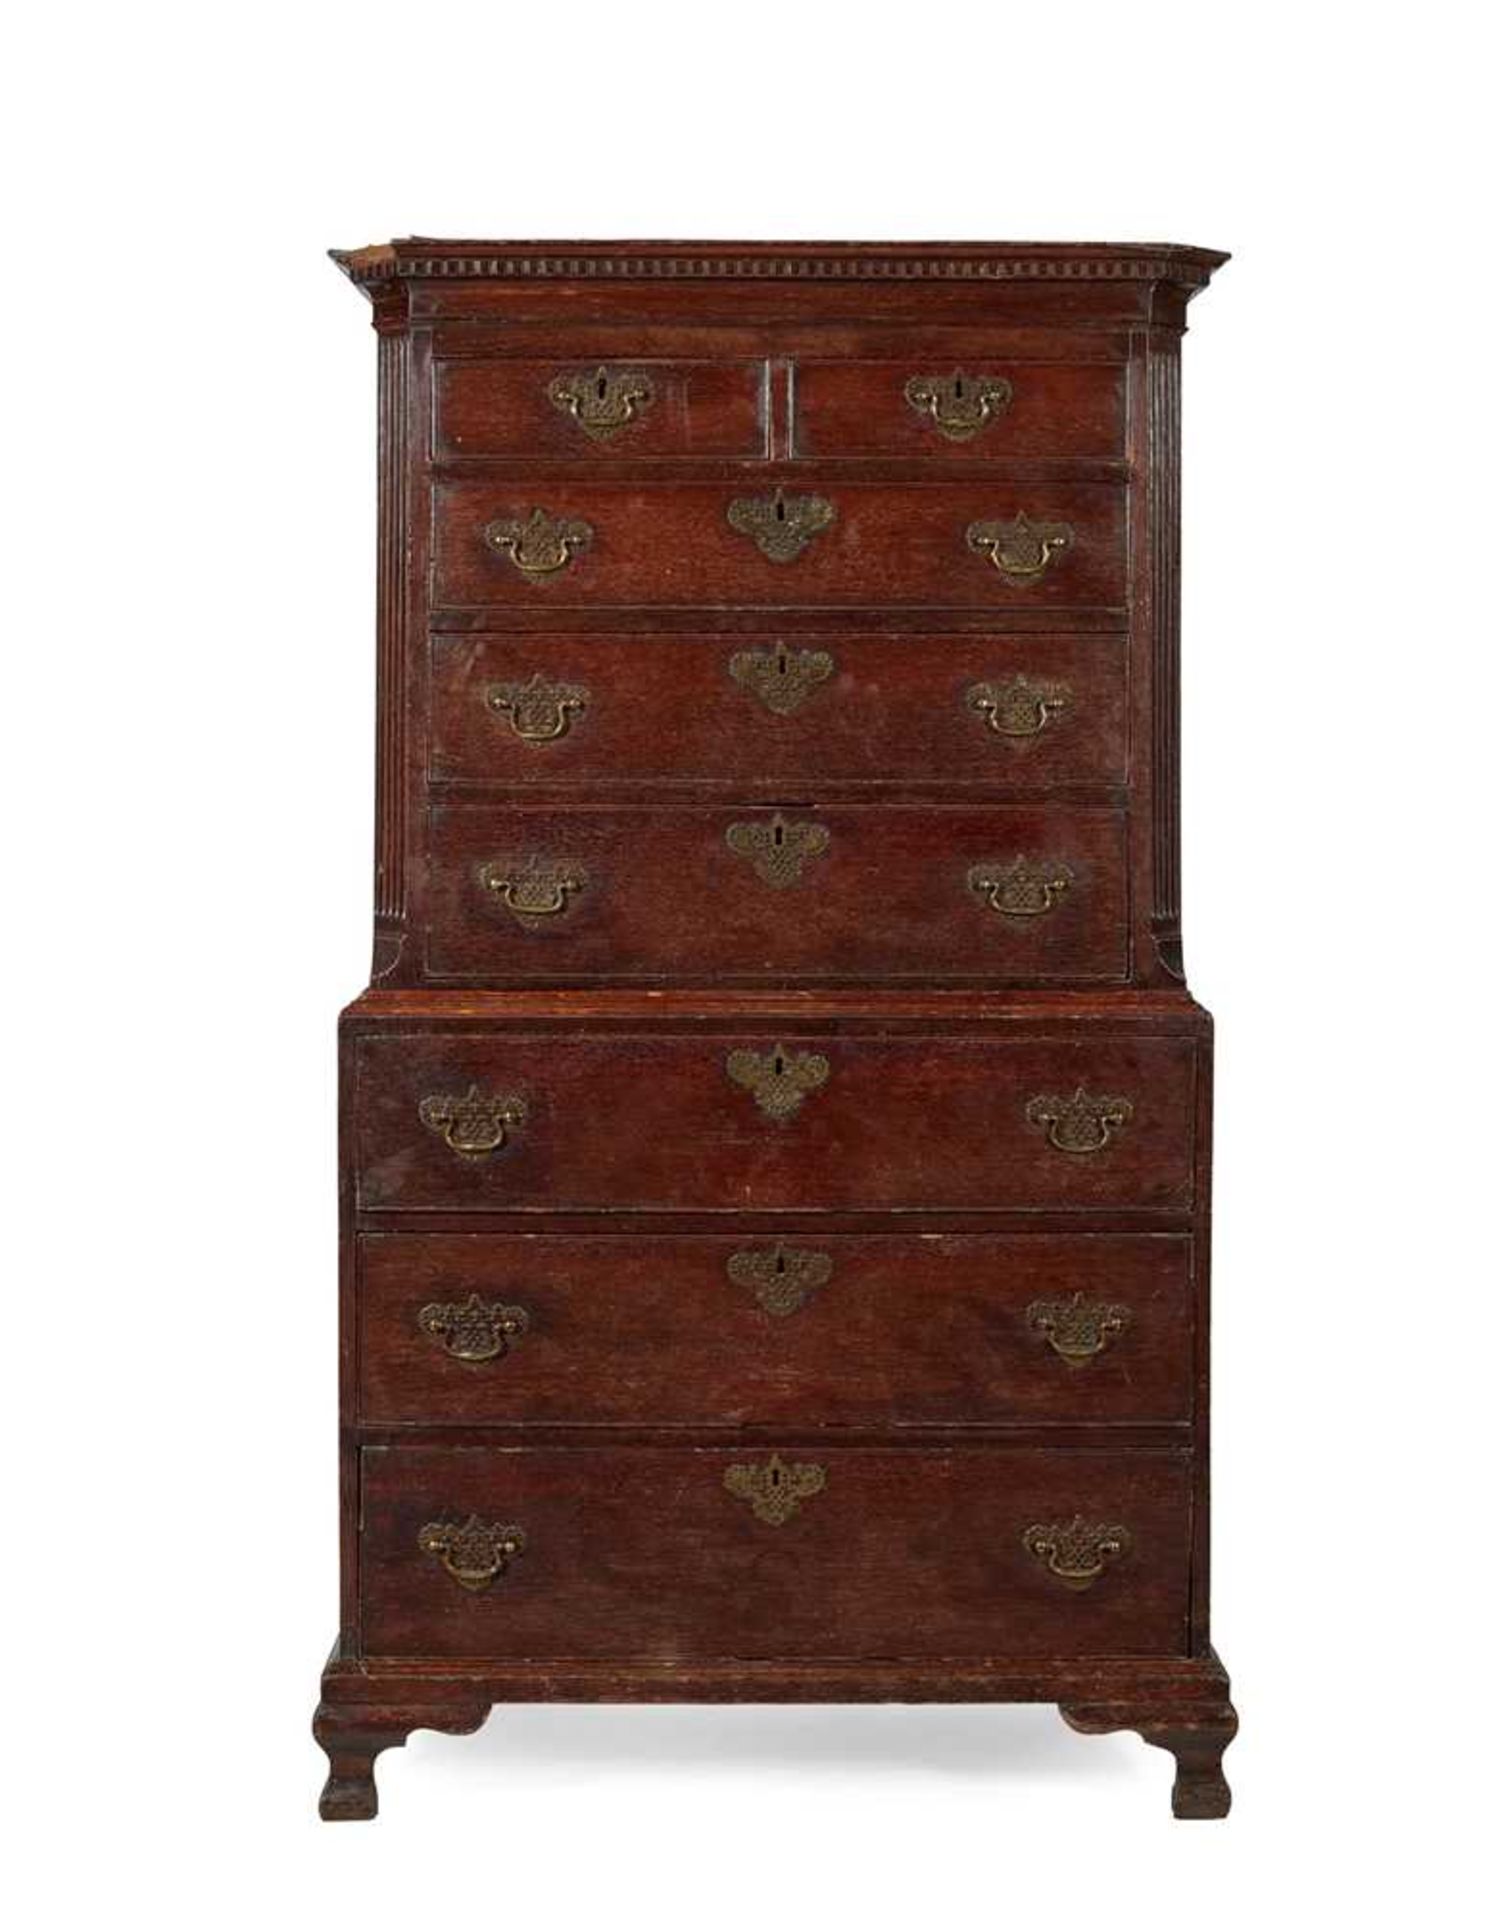 GEORGE II PROVINCIAL OAK CHEST-ON-CHEST MID 18TH CENTURY